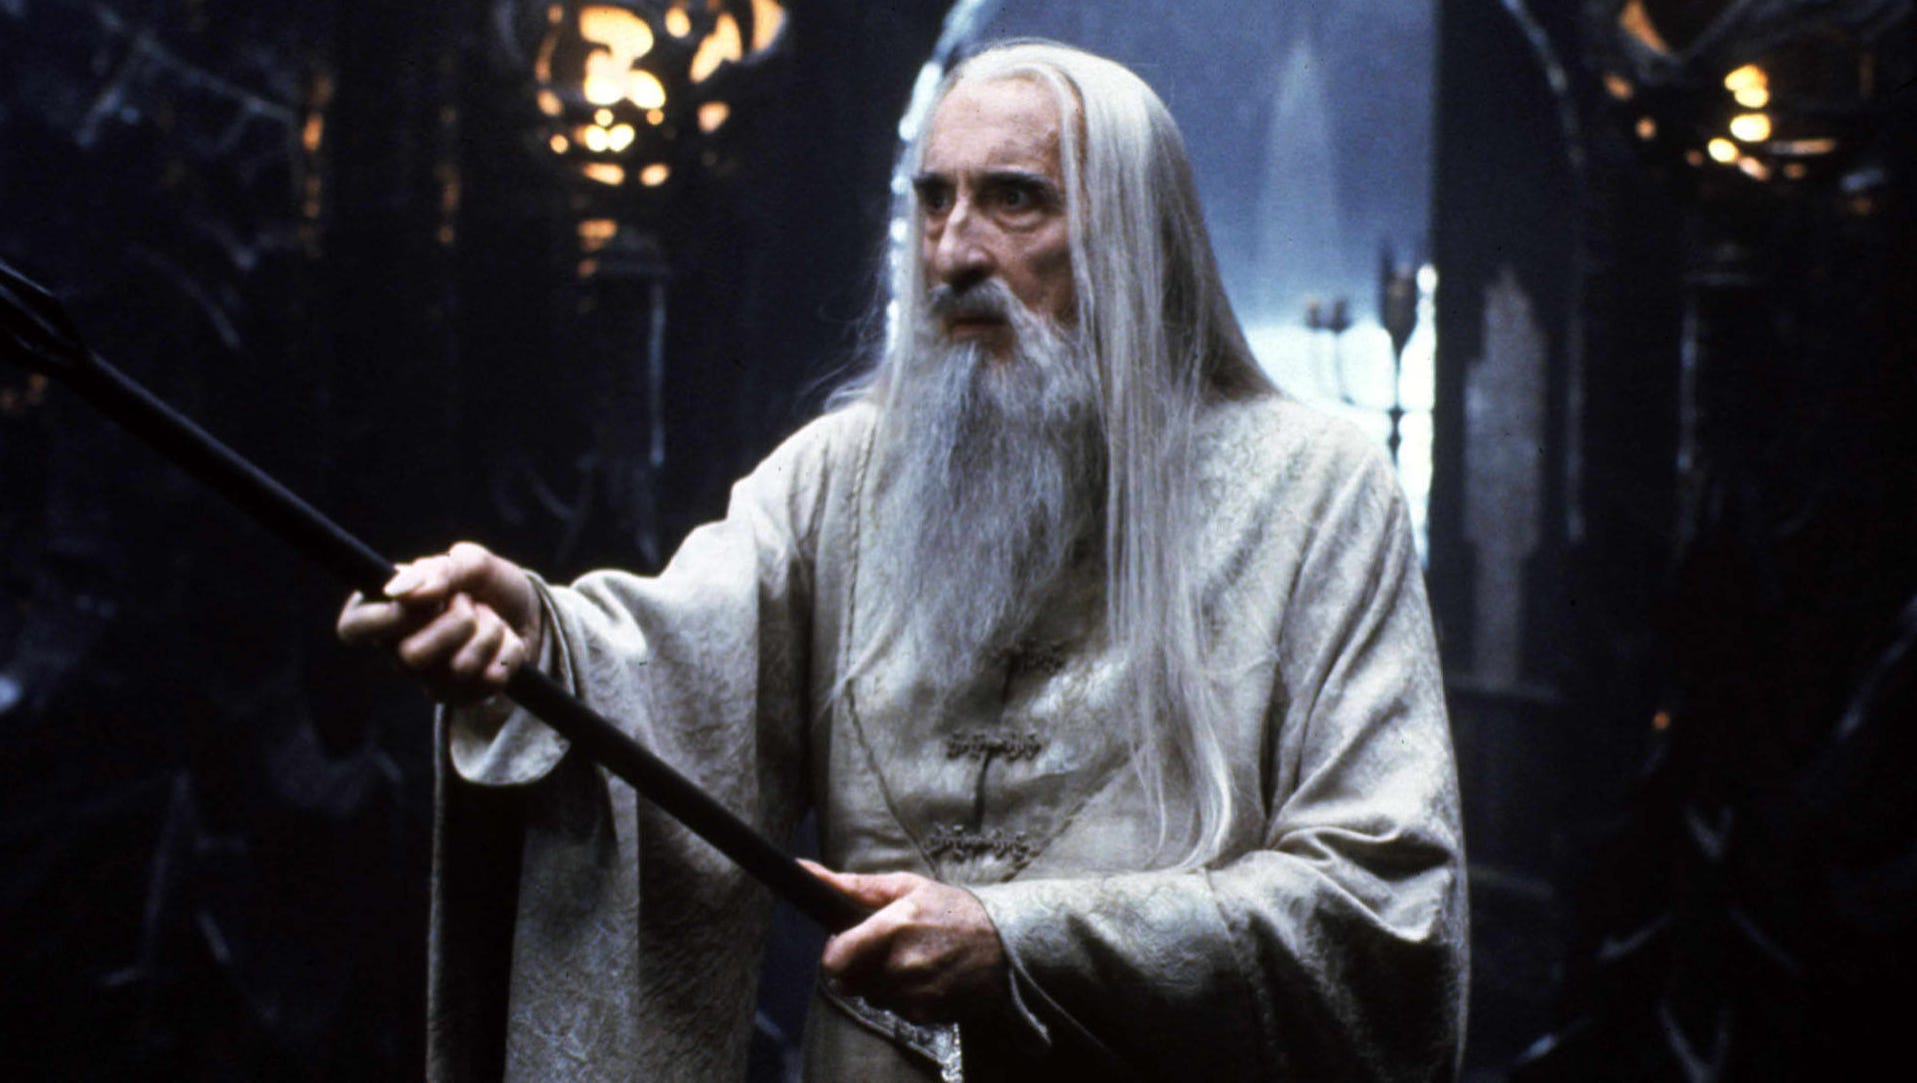 Reports: Actor Christopher Lee dies at 93